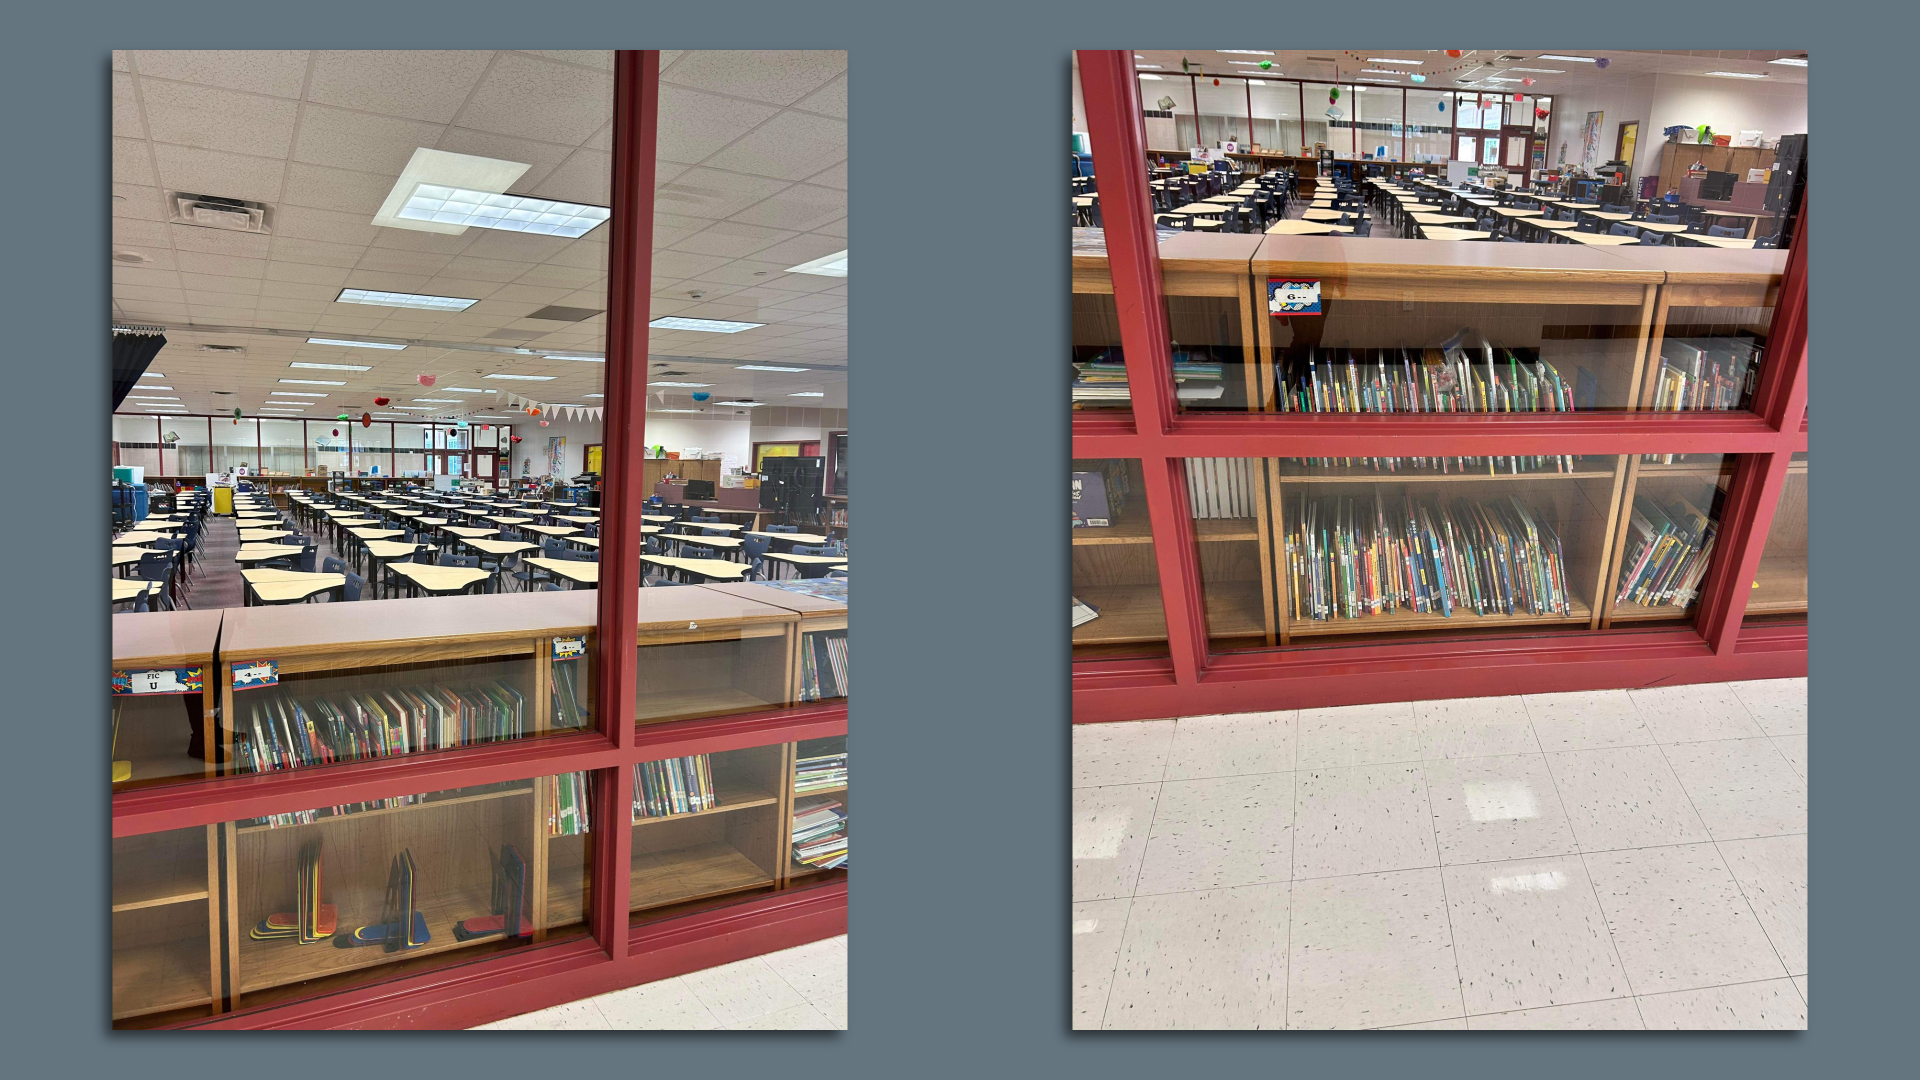 Two photos showing the inside of a newly renovated disciplinary center that used to be a school library in Houston ISD